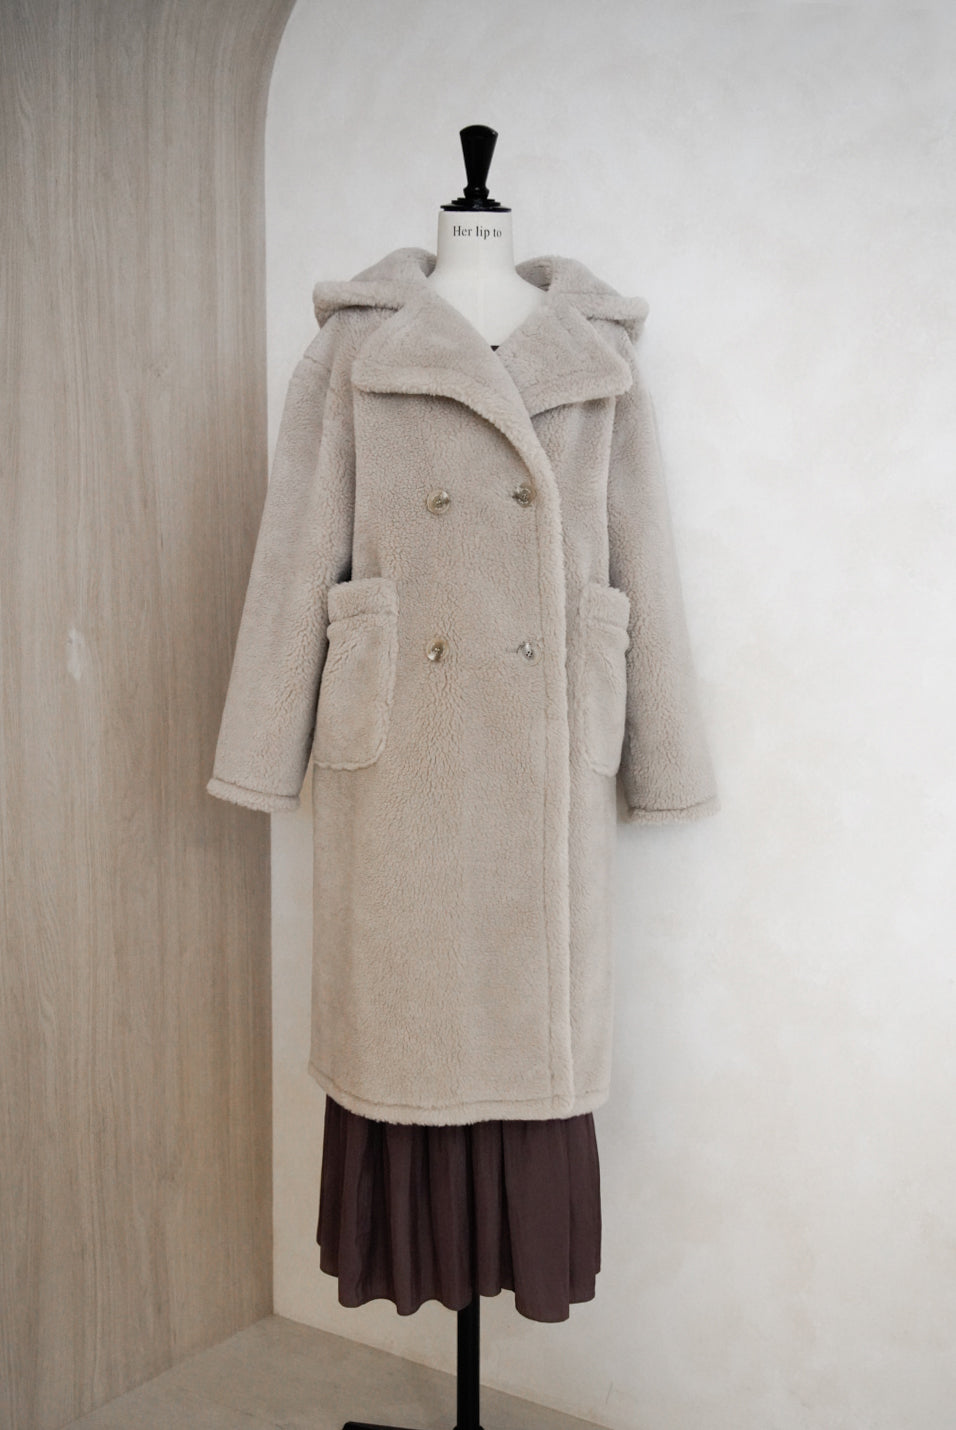 her lip to Fleur Shearling Boa Coat - ロングコート